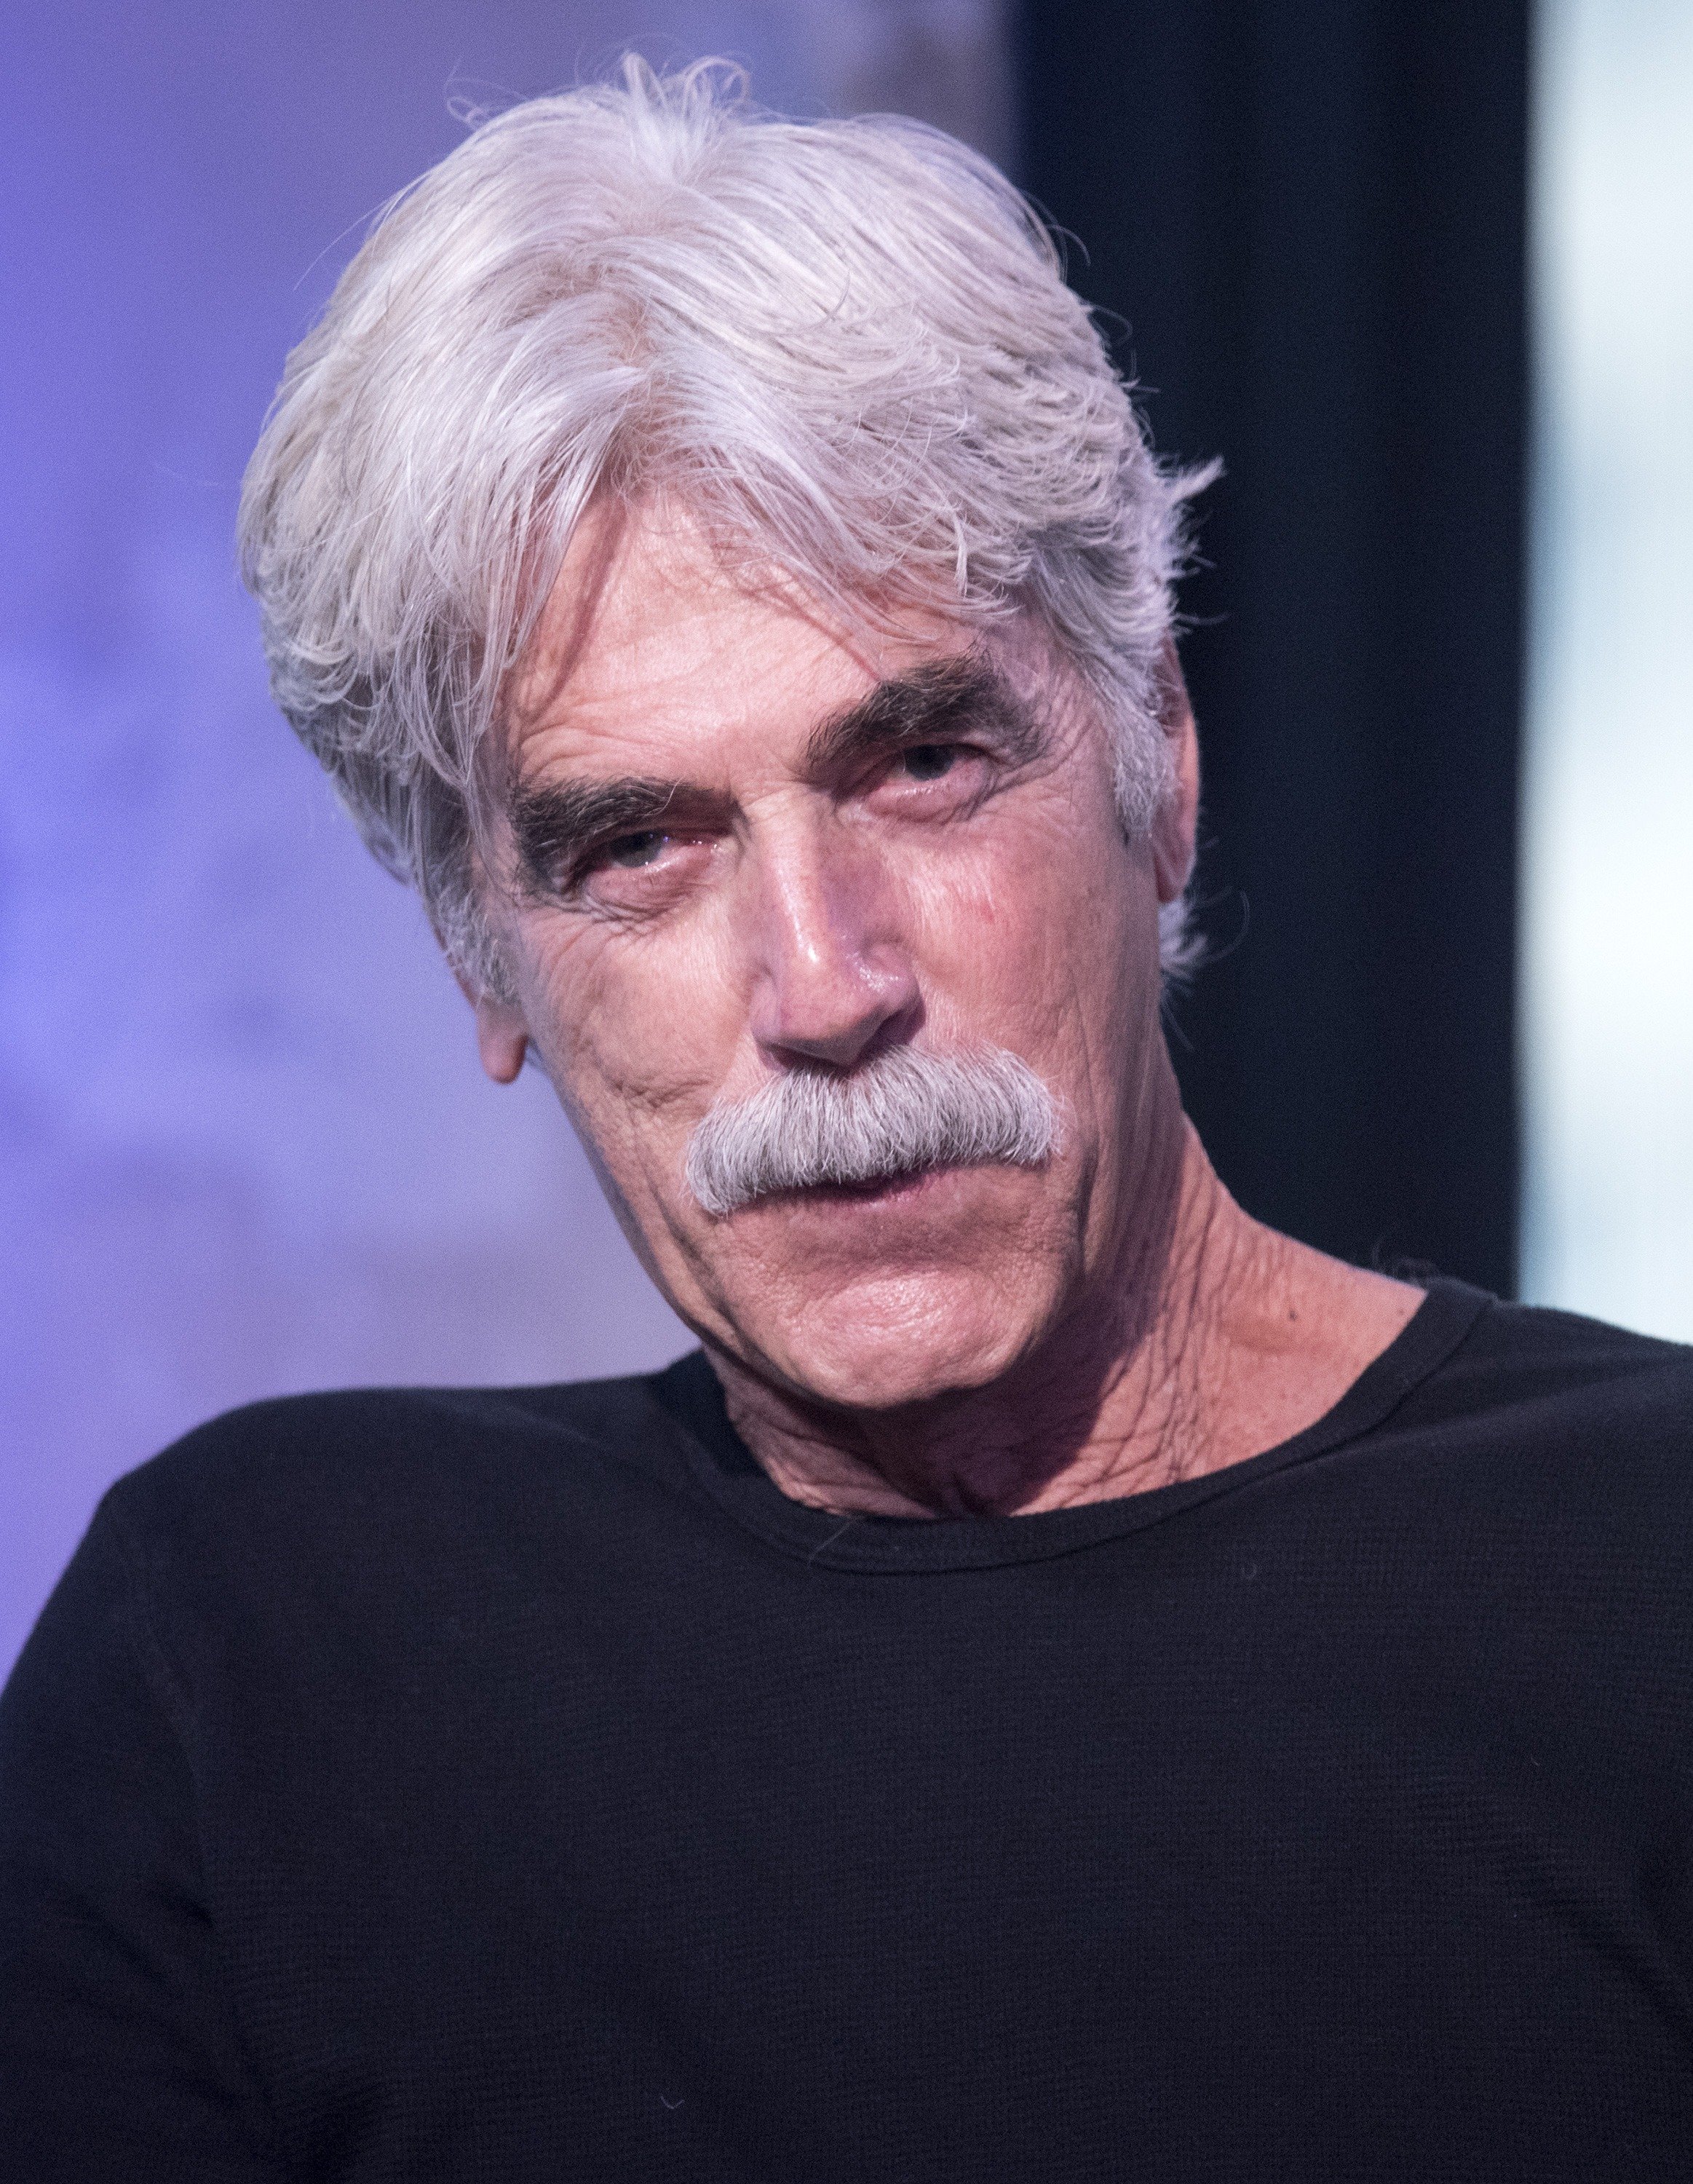 Actor Sam Elliot speaks at the AOL BUILD Speaker Series Present: "Grandma" at AOL Studios In New York on August 18, 2015 in New York City. | Source: Getty Images